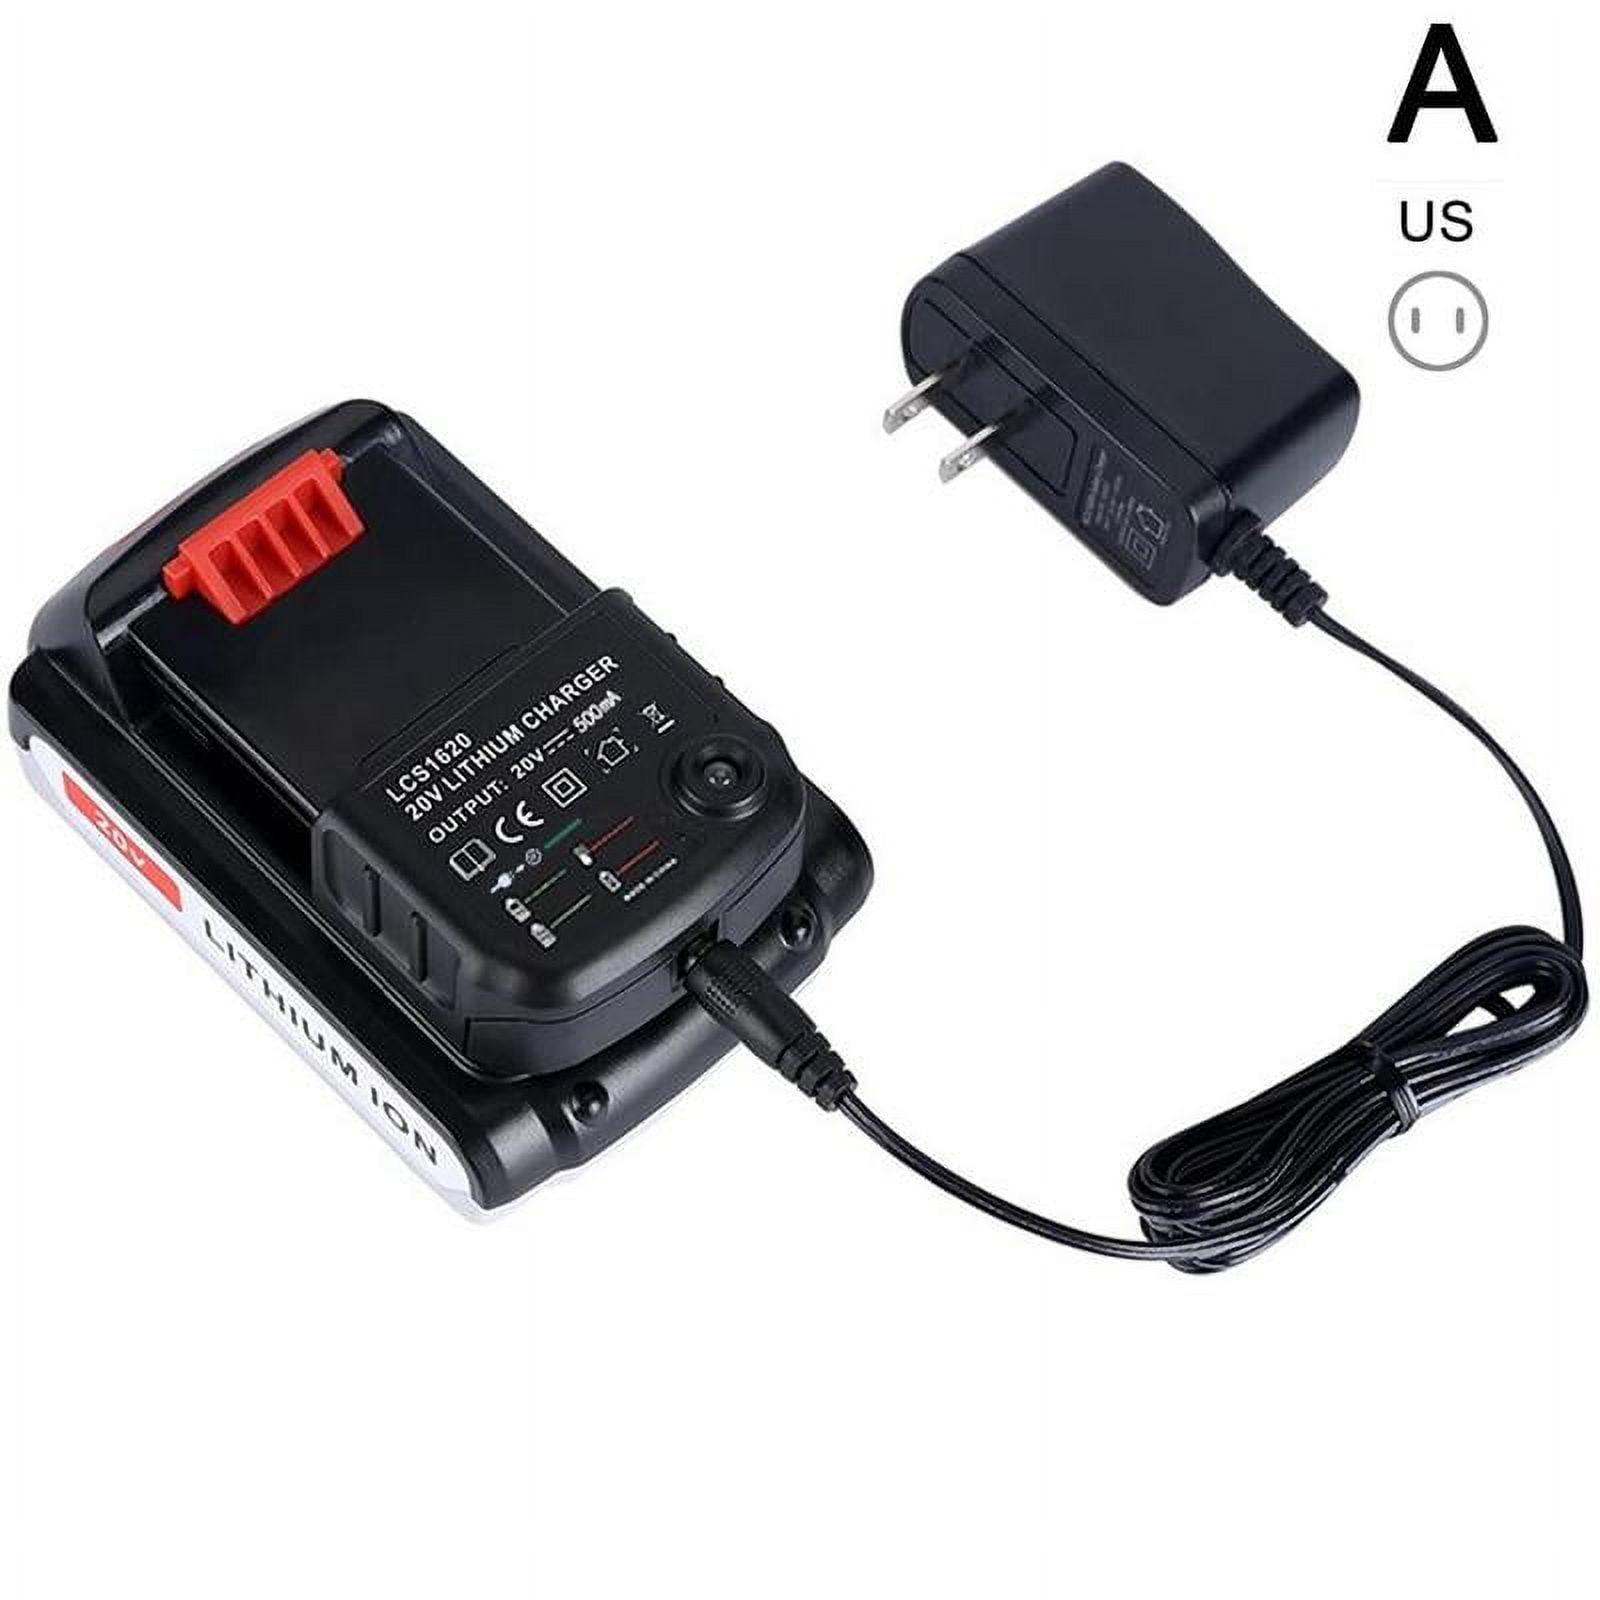 LCS1620 Lithium Battery Charger for BLACK & DECKER Rechargable Battery  Charger 20V for LBXR20 LB20 LBX20 LBX4020 LB2X4020 Part - AliExpress